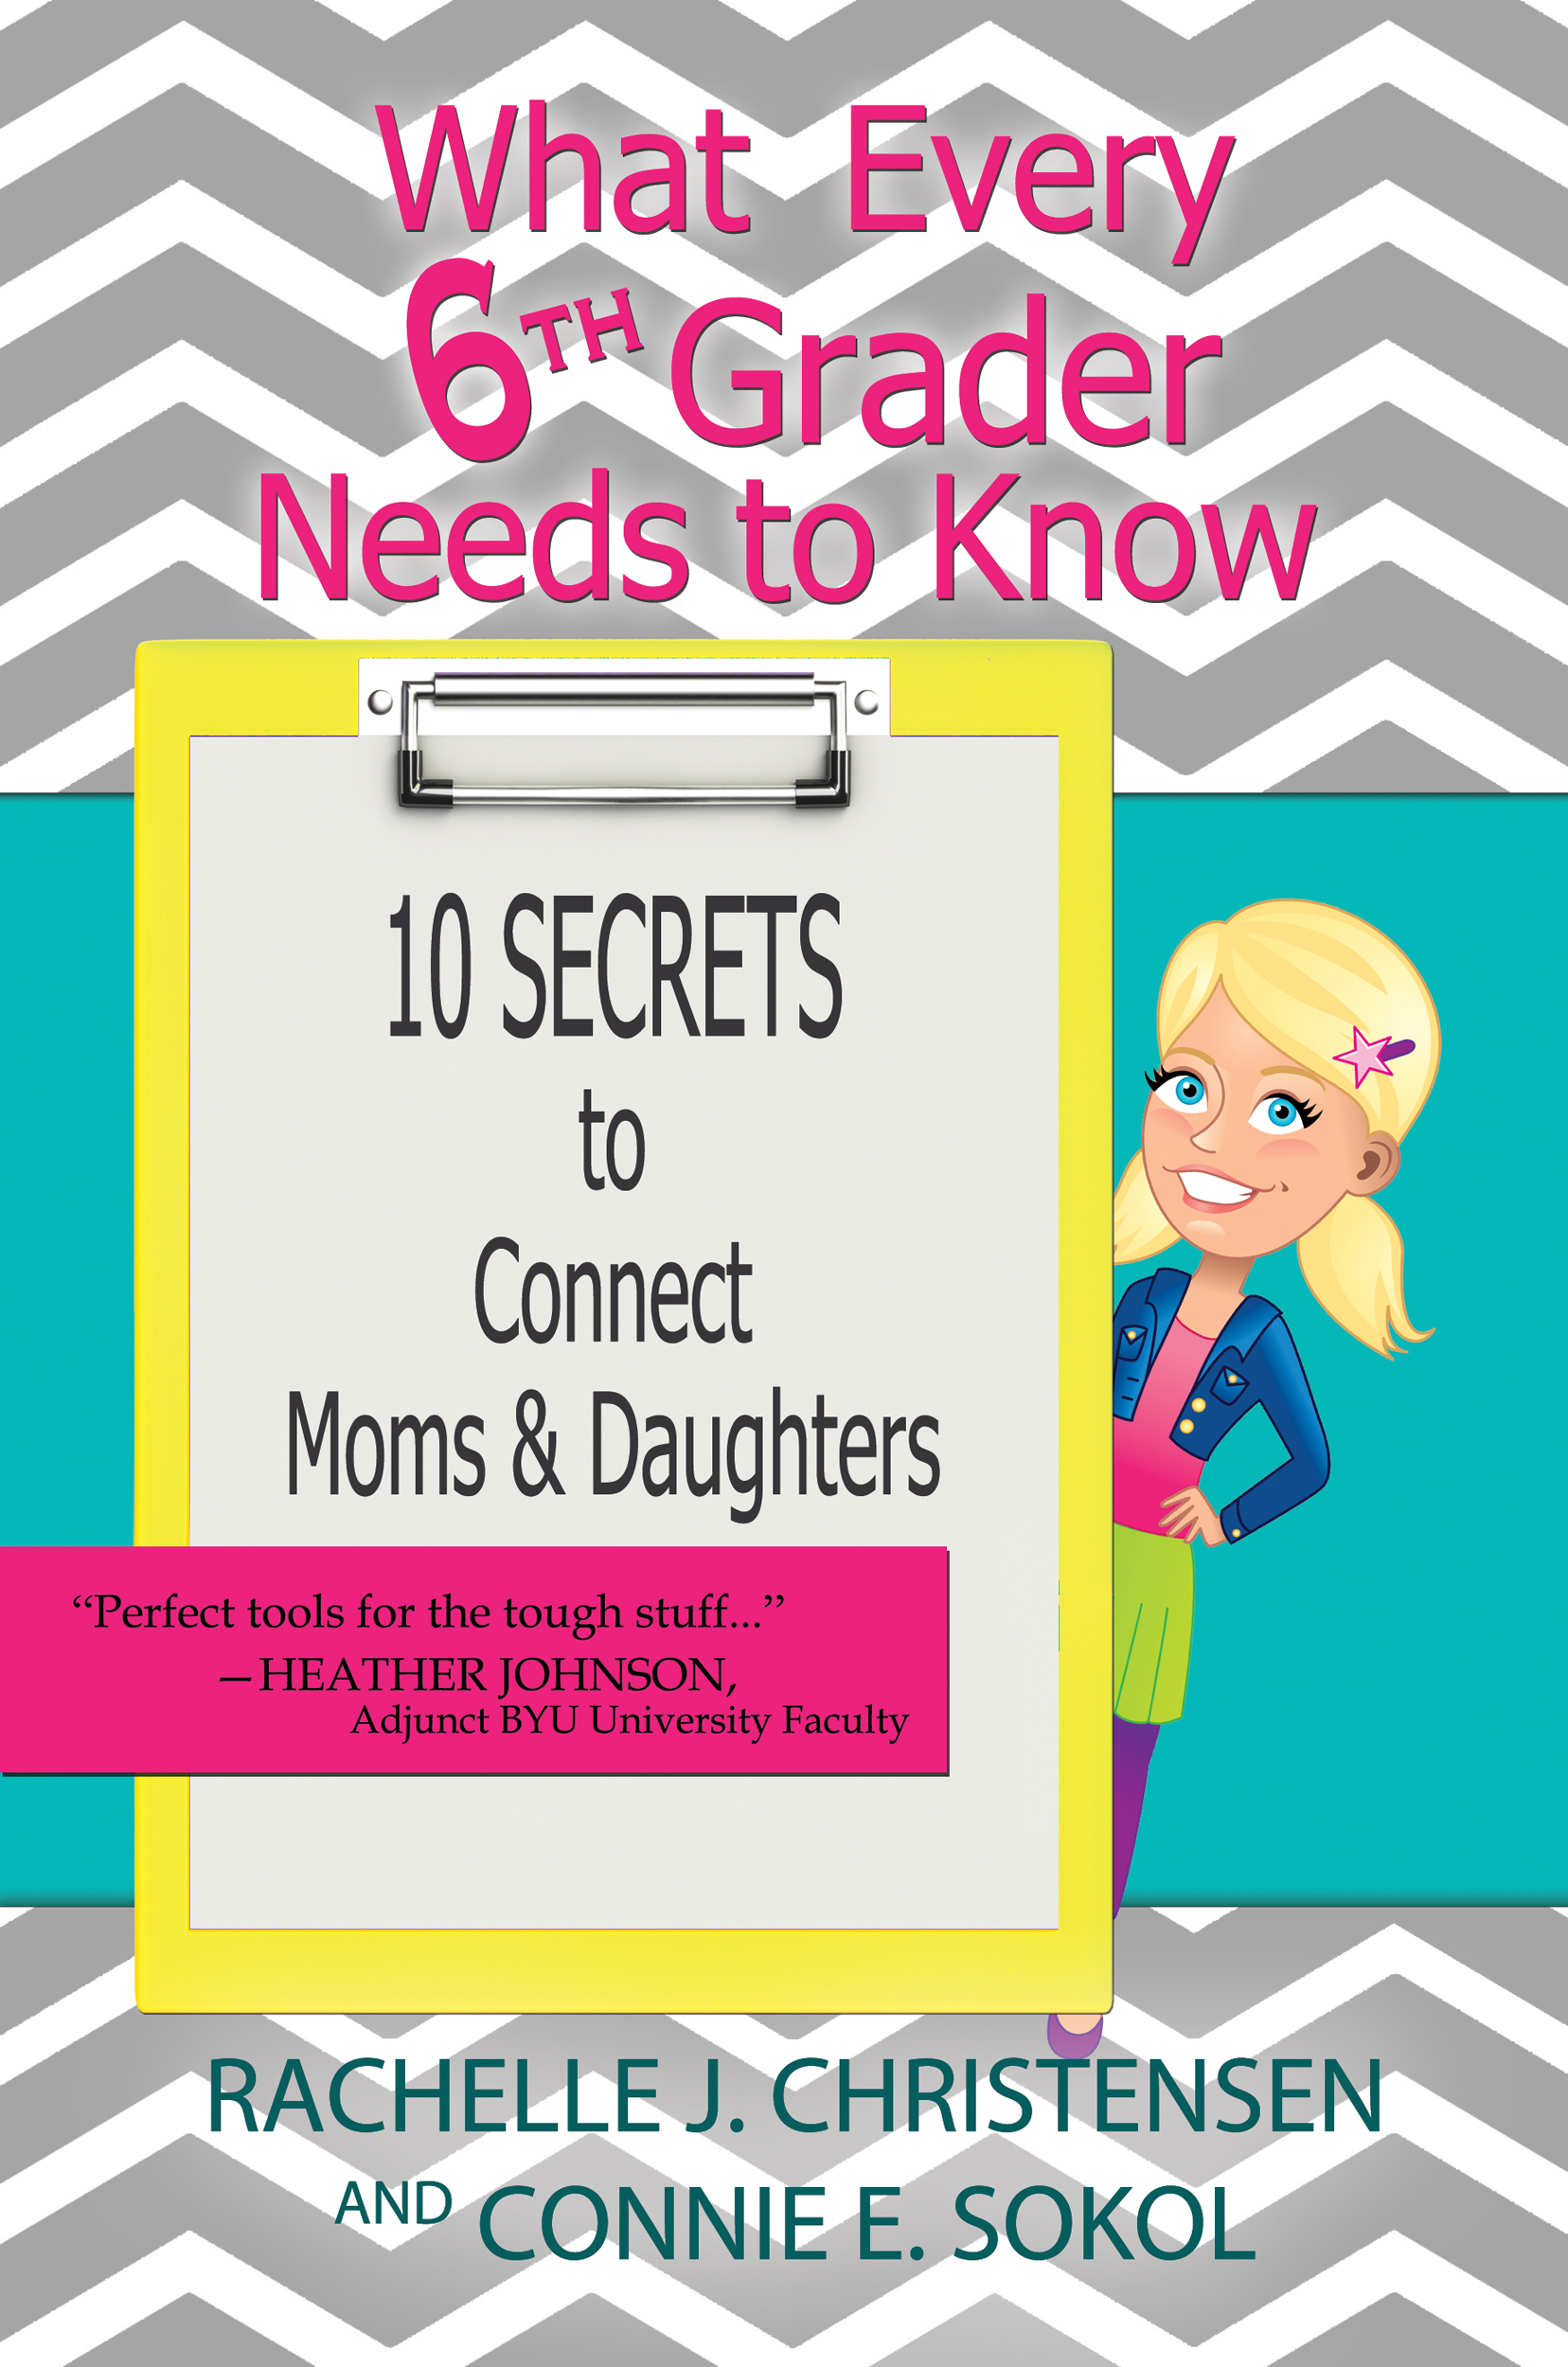 TEN SECRETS EVERY SIXTH GRADER SHOULD KNOW - Front Cover  (for Amazon)